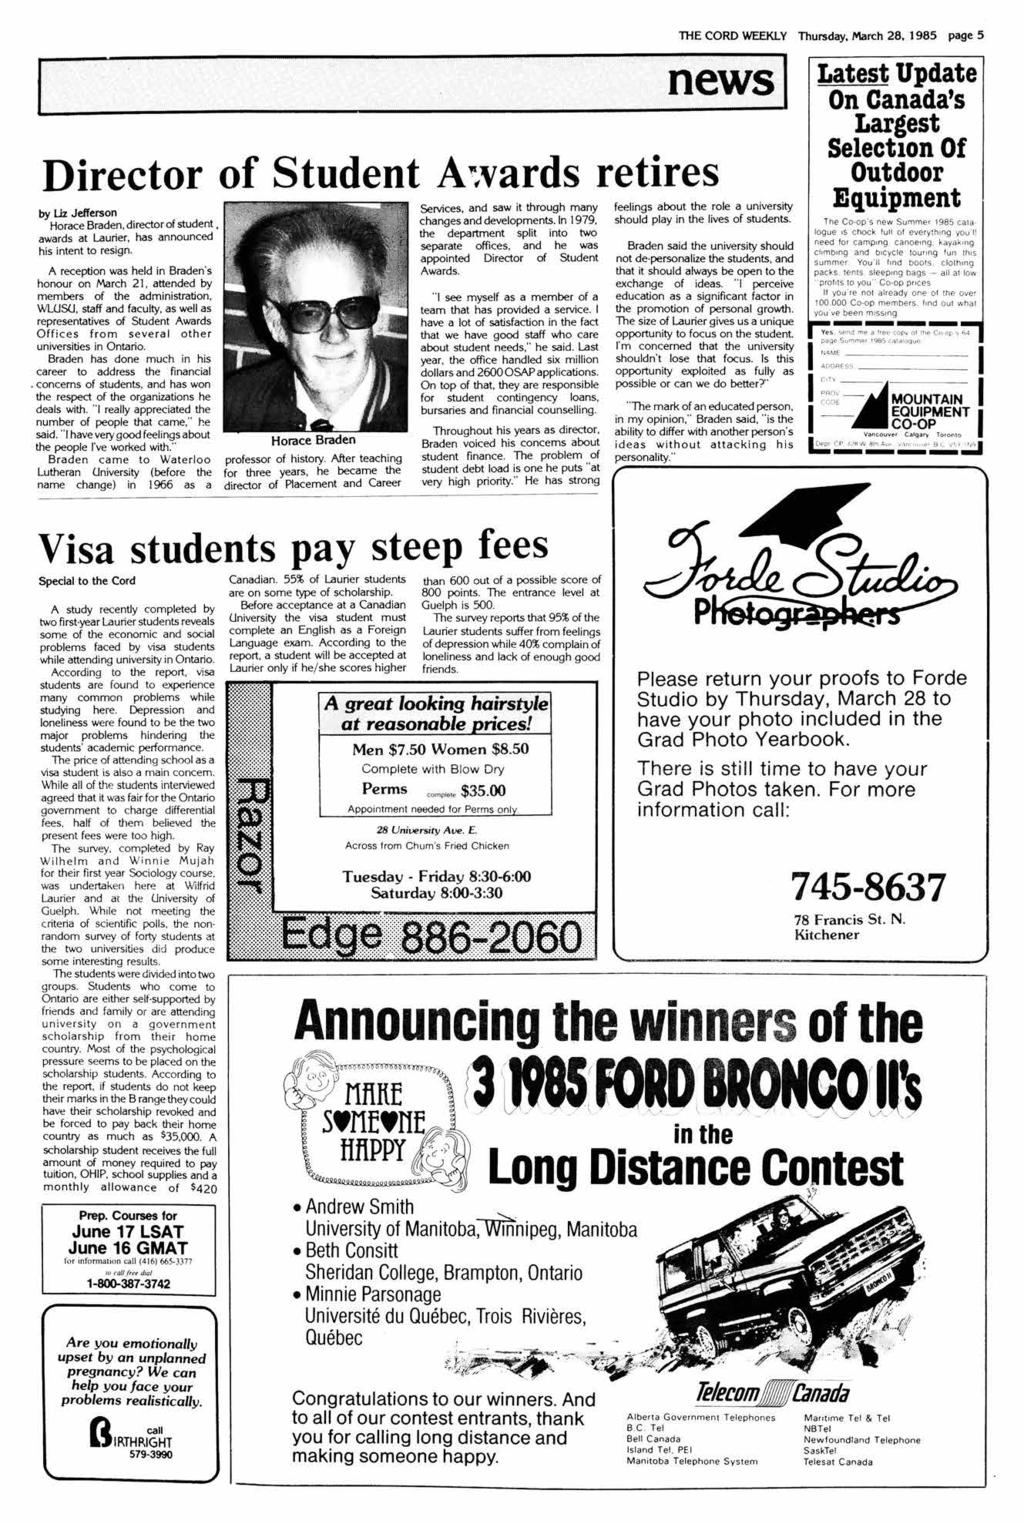 Frday all THE CORD WEEKLY Thursday, March 28, 1985 5 Drector of Student Awards retres by Lz Jefferson Horace Braden, drector of student, awards at Laurer, hs ntent to resgn.